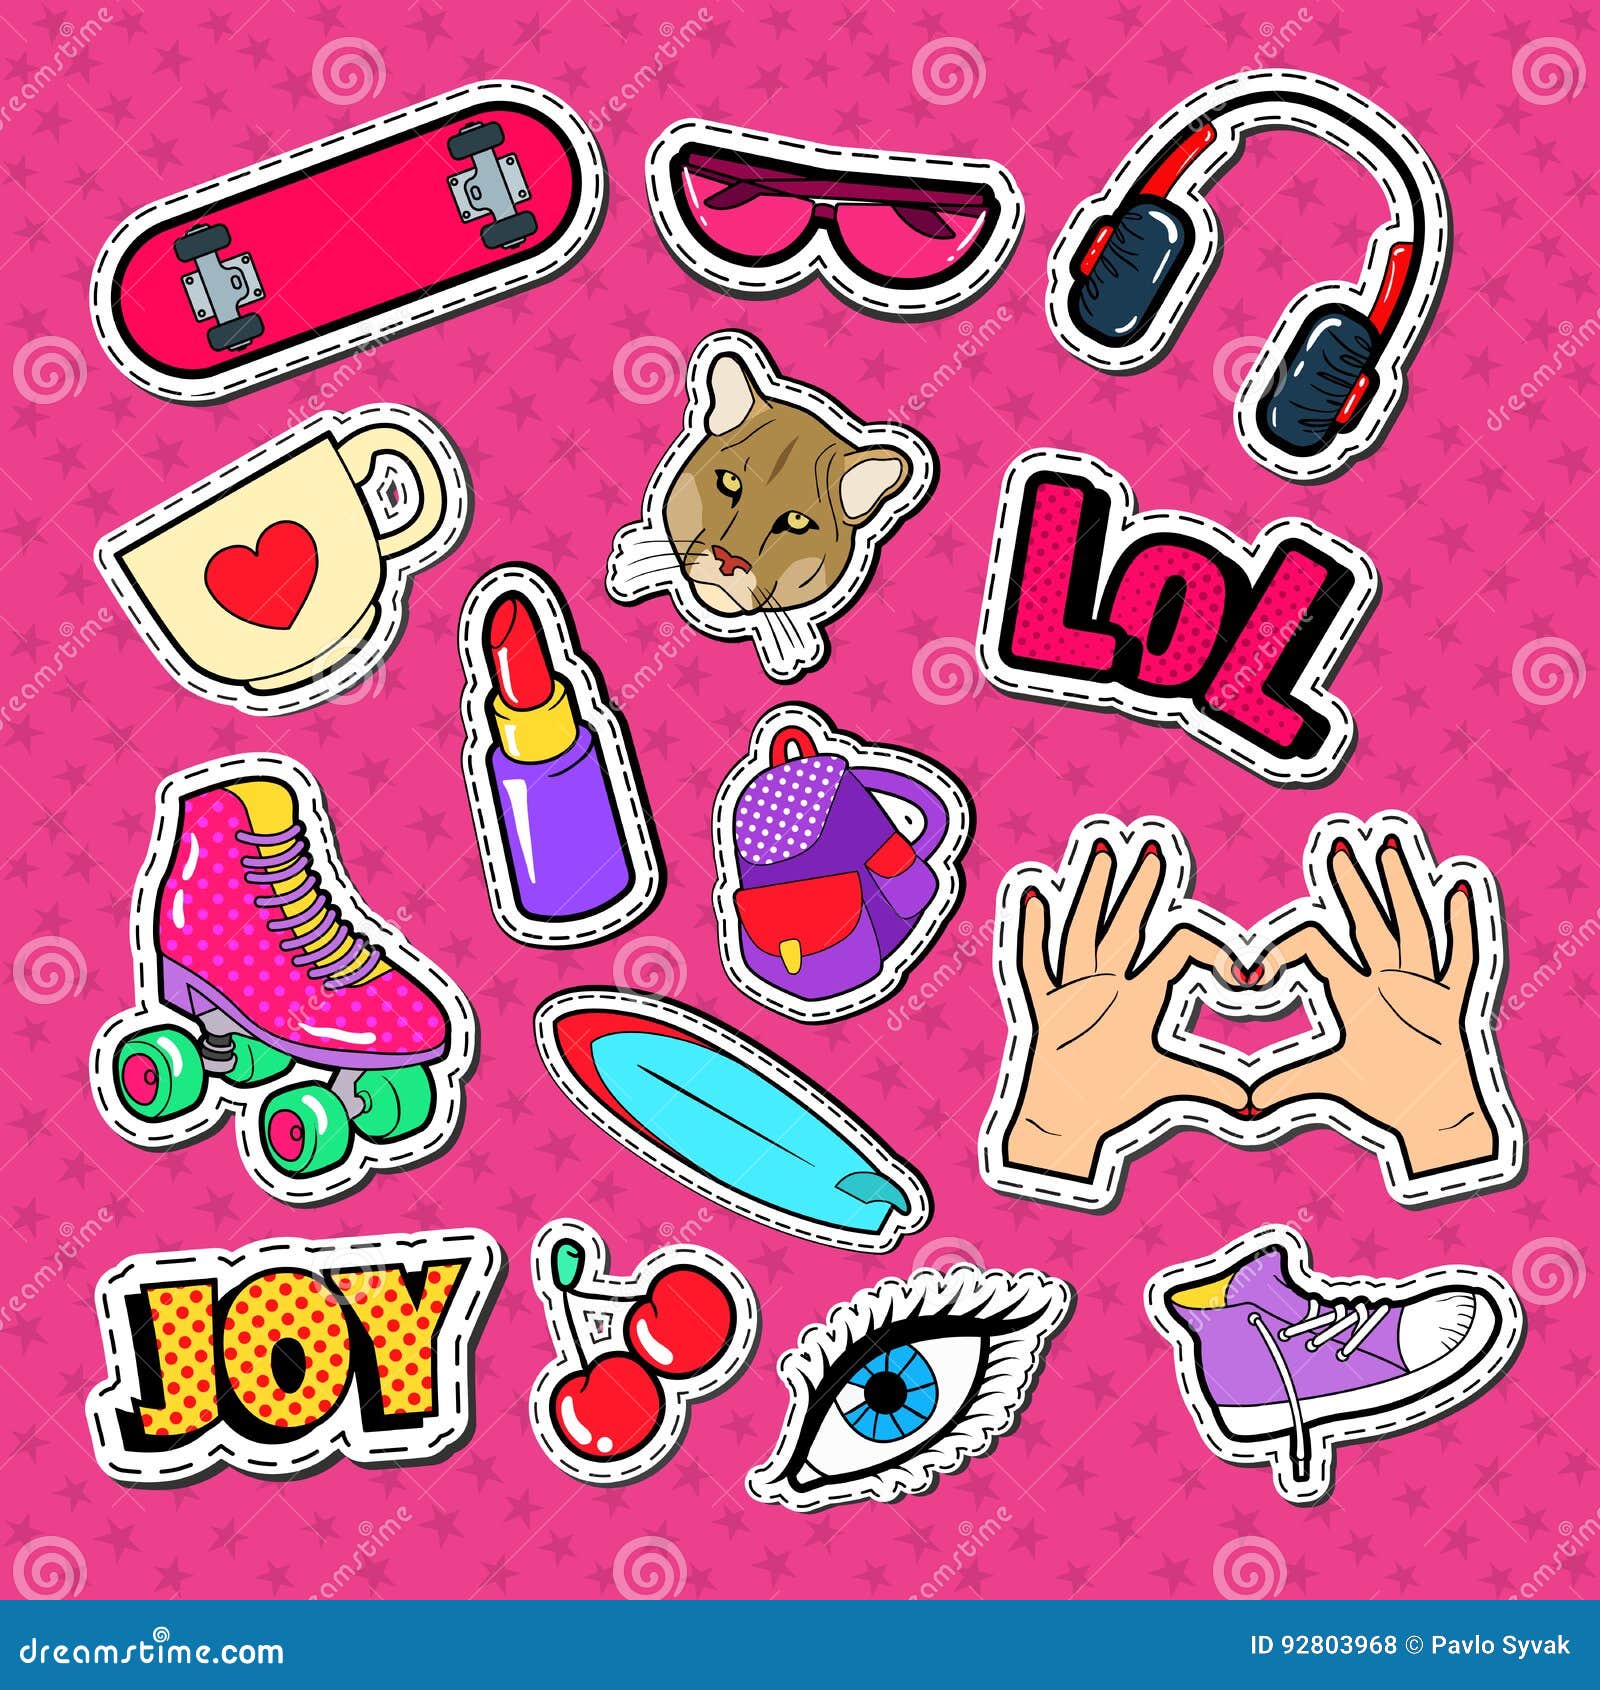 Fashion Pop Art Patch Stickers Girls Cartoon Cute Badges Doodle Teenage  Patches With Lipstick Cute Food